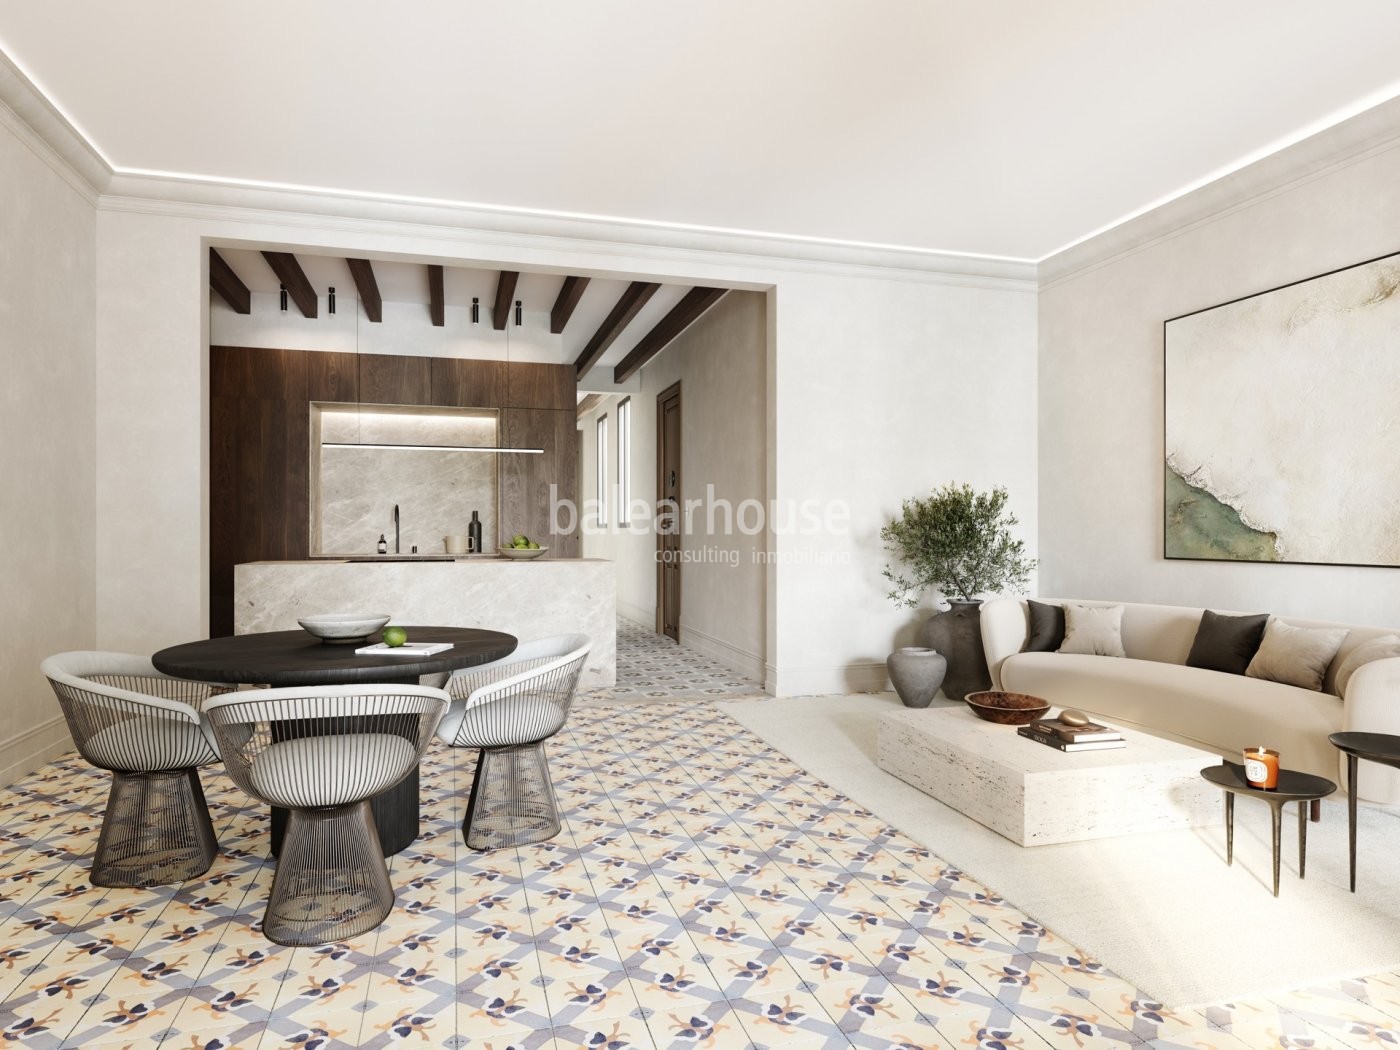 New Luxury apartment in historic building in downtown Palma.